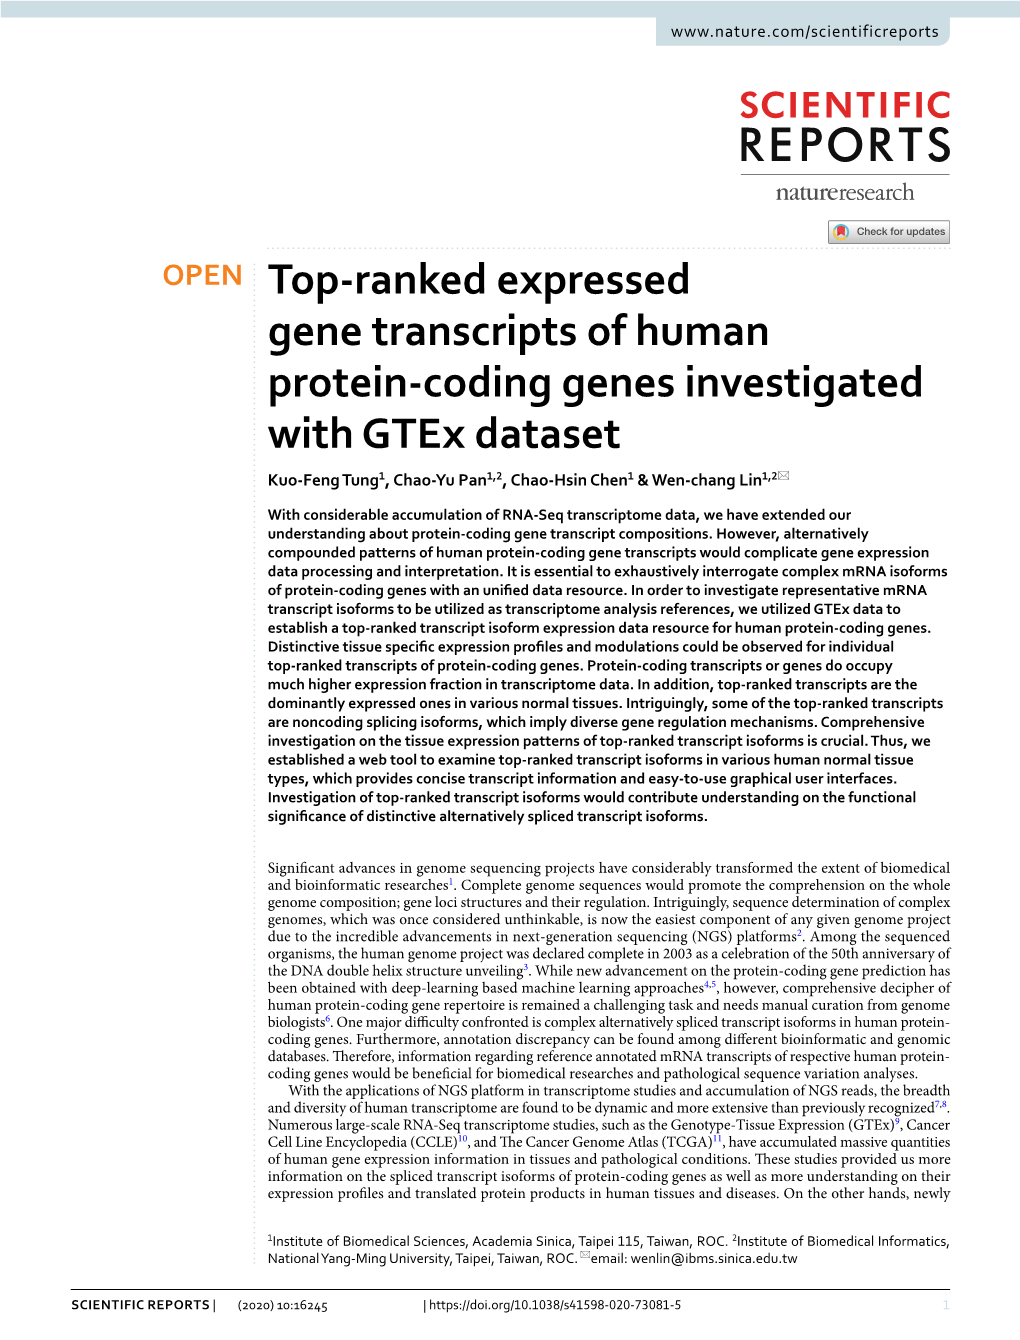 Top-Ranked Expressed Gene Transcripts of Human Protein-Coding